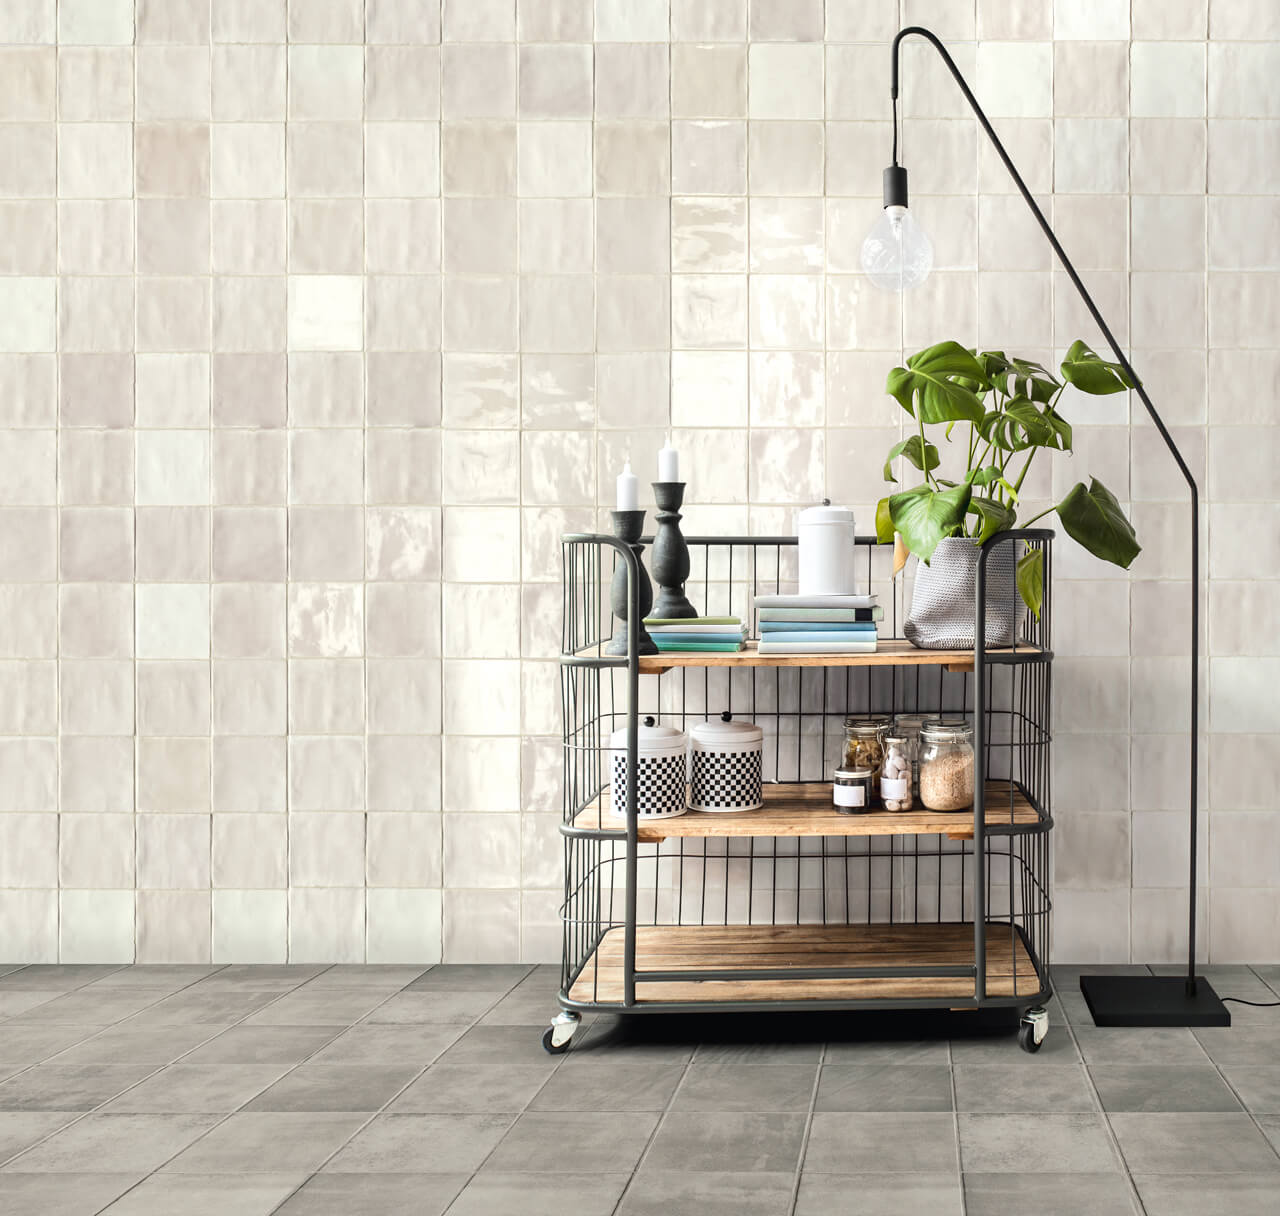 Marrakesh Pure Linen 6 x 6 Glossy Wall Tile from Garden State Tile